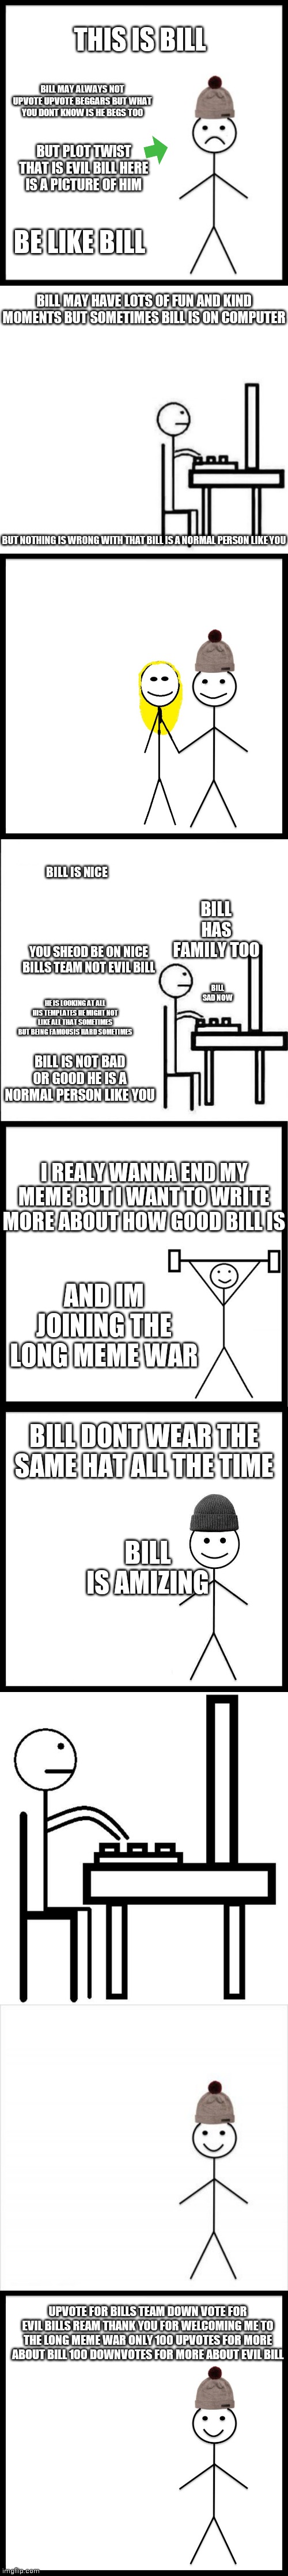 Im joining the long meme war | THIS IS BILL; BILL MAY ALWAYS NOT UPVOTE UPVOTE BEGGARS BUT WHAT YOU DONT KNOW IS HE BEGS TOO; BUT PLOT TWIST THAT IS EVIL BILL HERE IS A PICTURE OF HIM; BE LIKE BILL; BILL MAY HAVE LOTS OF FUN AND KIND MOMENTS BUT SOMETIMES BILL IS ON COMPUTER; BUT NOTHING IS WRONG WITH THAT BILL IS A NORMAL PERSON LIKE YOU; BILL IS NICE; BILL HAS FAMILY TOO; YOU SHEOD BE ON NICE BILLS TEAM NOT EVIL BILL; BILL SAD NOW; HE IS LOOKING AT ALL HIS TEMPLATES HE MIGHT NOT LIKE ALL THAT SOMETIMES BUT BEING FAMOUSIS HARD SOMETIMES; BILL IS NOT BAD OR GOOD HE IS A NORMAL PERSON LIKE YOU; I REALY WANNA END MY MEME BUT I WANT TO WRITE MORE ABOUT HOW GOOD BILL IS; AND IM JOINING THE LONG MEME WAR; BILL DONT WEAR THE SAME HAT ALL THE TIME; BILL IS AMIZING; UPVOTE FOR BILLS TEAM DOWN VOTE FOR EVIL BILLS REAM THANK YOU FOR WELCOMING ME TO THE LONG MEME WAR ONLY 100 UPVOTES FOR MORE ABOUT BILL 100 DOWNVOTES FOR MORE ABOUT EVIL BILL | image tagged in don't be like bill,be like bill computer,be like bill couple happy,be like bill original,be like bill gym,be like bill | made w/ Imgflip meme maker